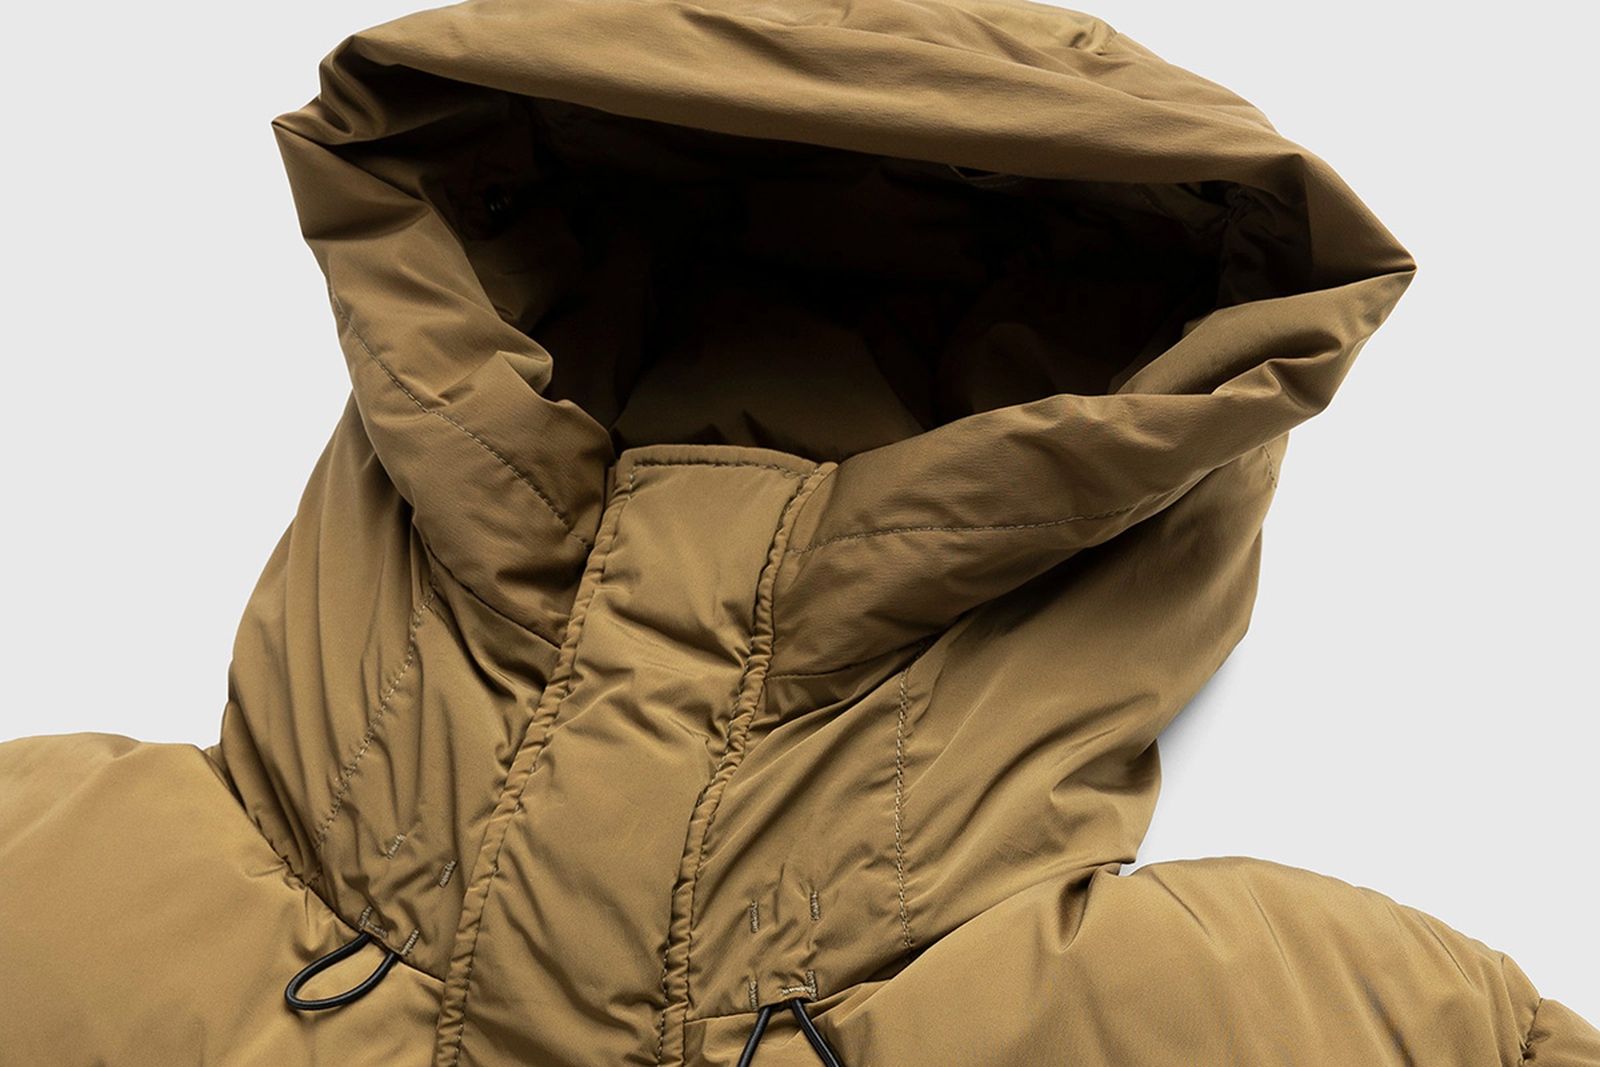 Down Jackets: 11 of the Best to Down Jackets for 2022